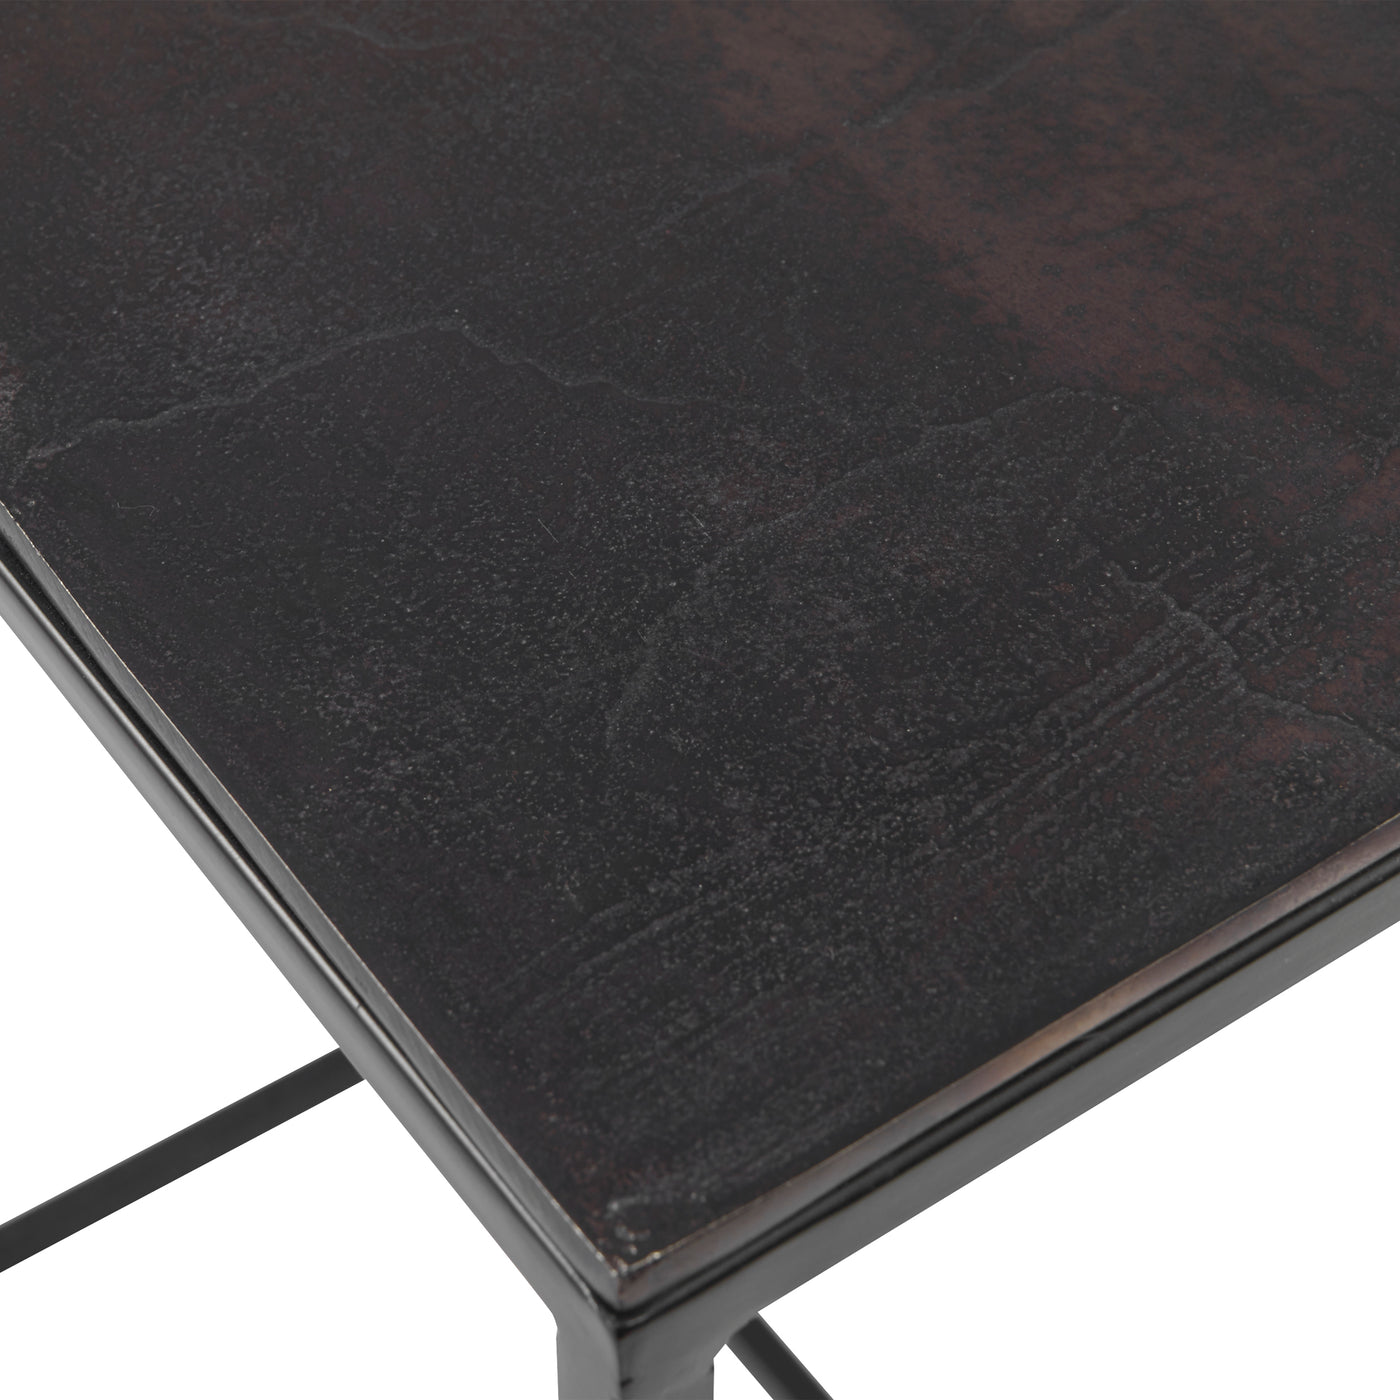 Functional Nesting Tables Constructed In An Aged Black Iron, Featuring A Textured Cast Aluminum Slab Top Finished In A Pla...